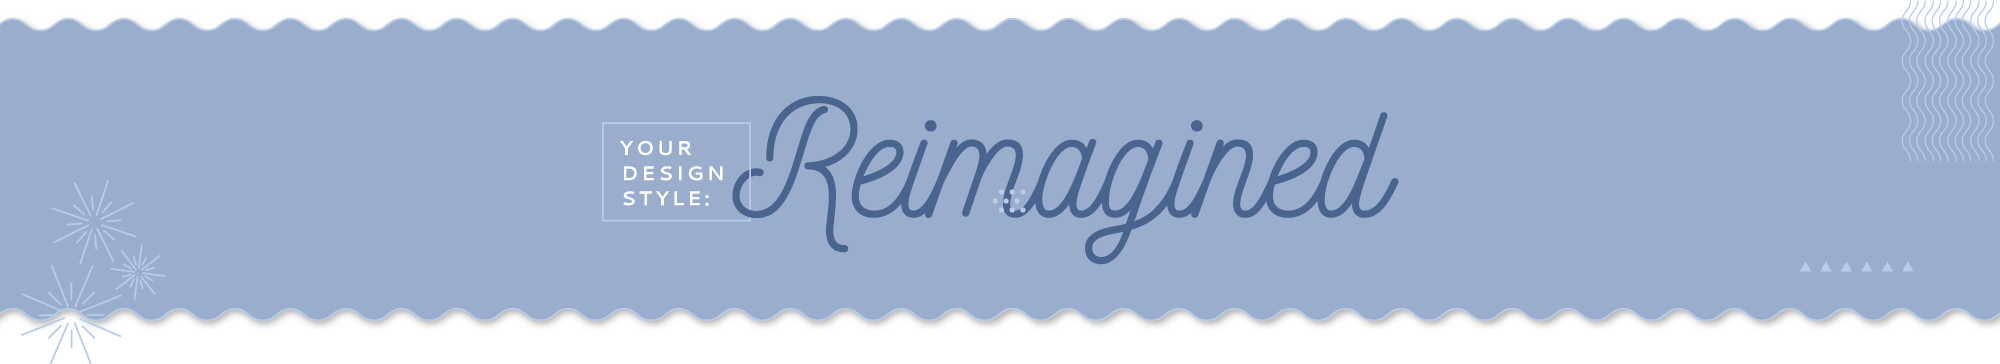 Your Design Style: Reimagined